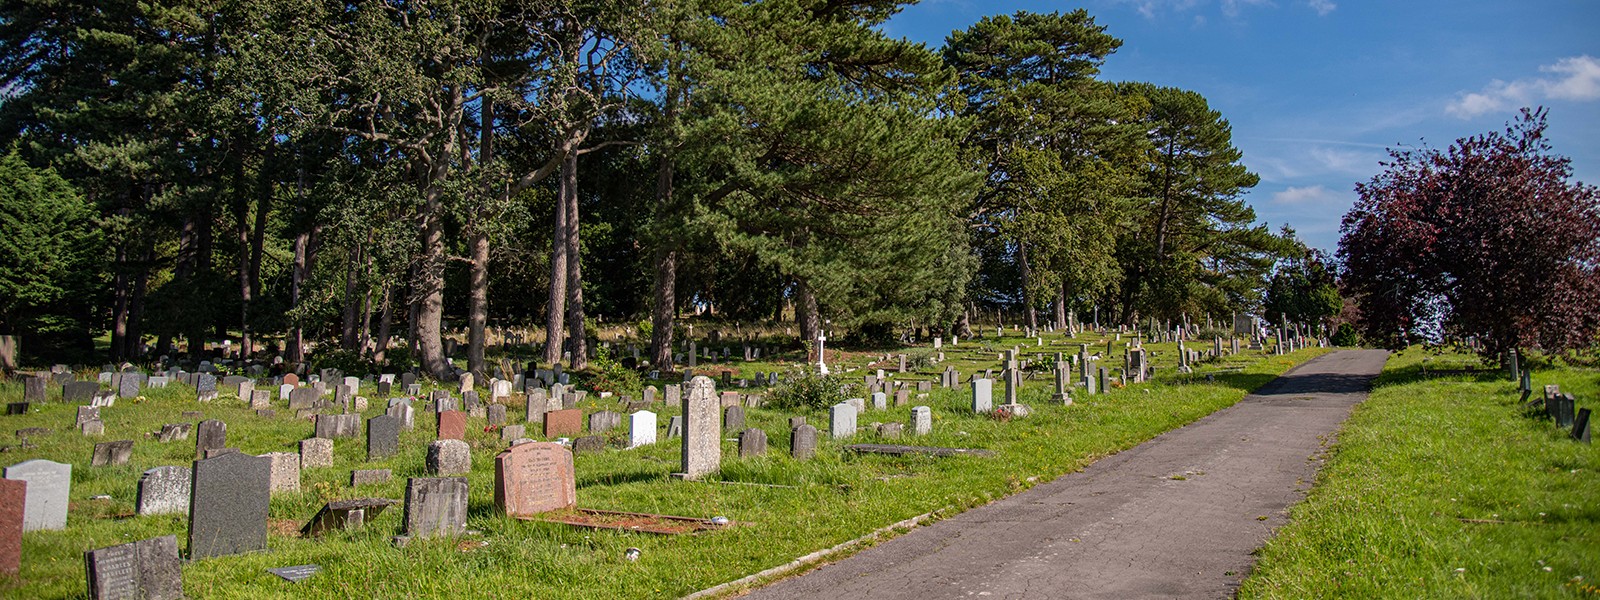 Graves at Parkstone cemetery